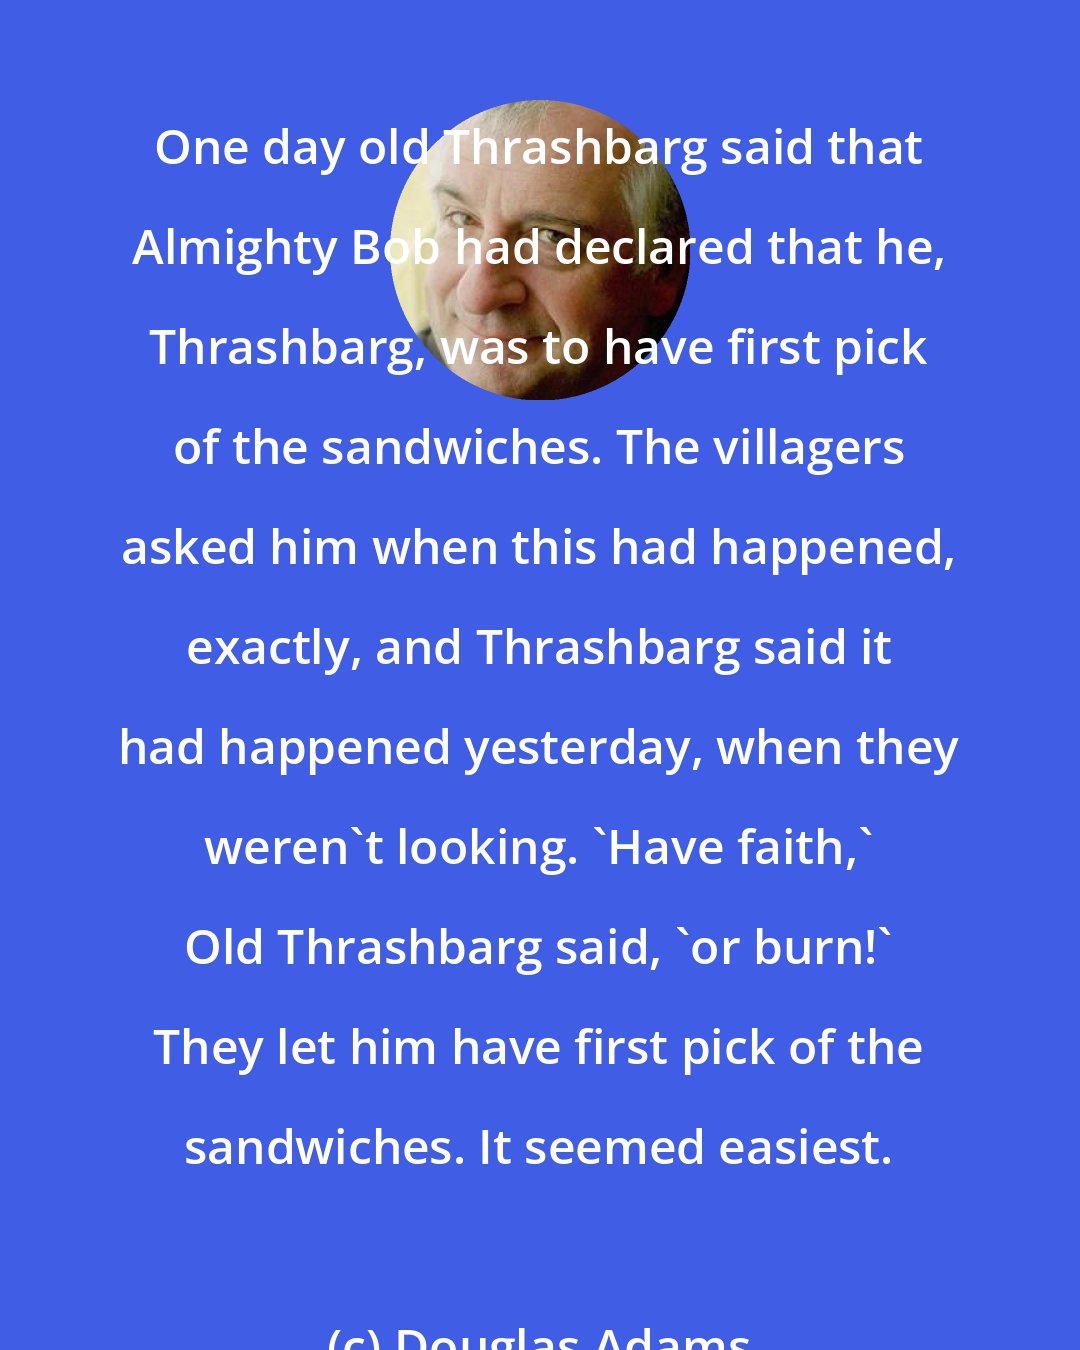 Douglas Adams: One day old Thrashbarg said that Almighty Bob had declared that he, Thrashbarg, was to have first pick of the sandwiches. The villagers asked him when this had happened, exactly, and Thrashbarg said it had happened yesterday, when they weren't looking. 'Have faith,' Old Thrashbarg said, 'or burn!' They let him have first pick of the sandwiches. It seemed easiest.